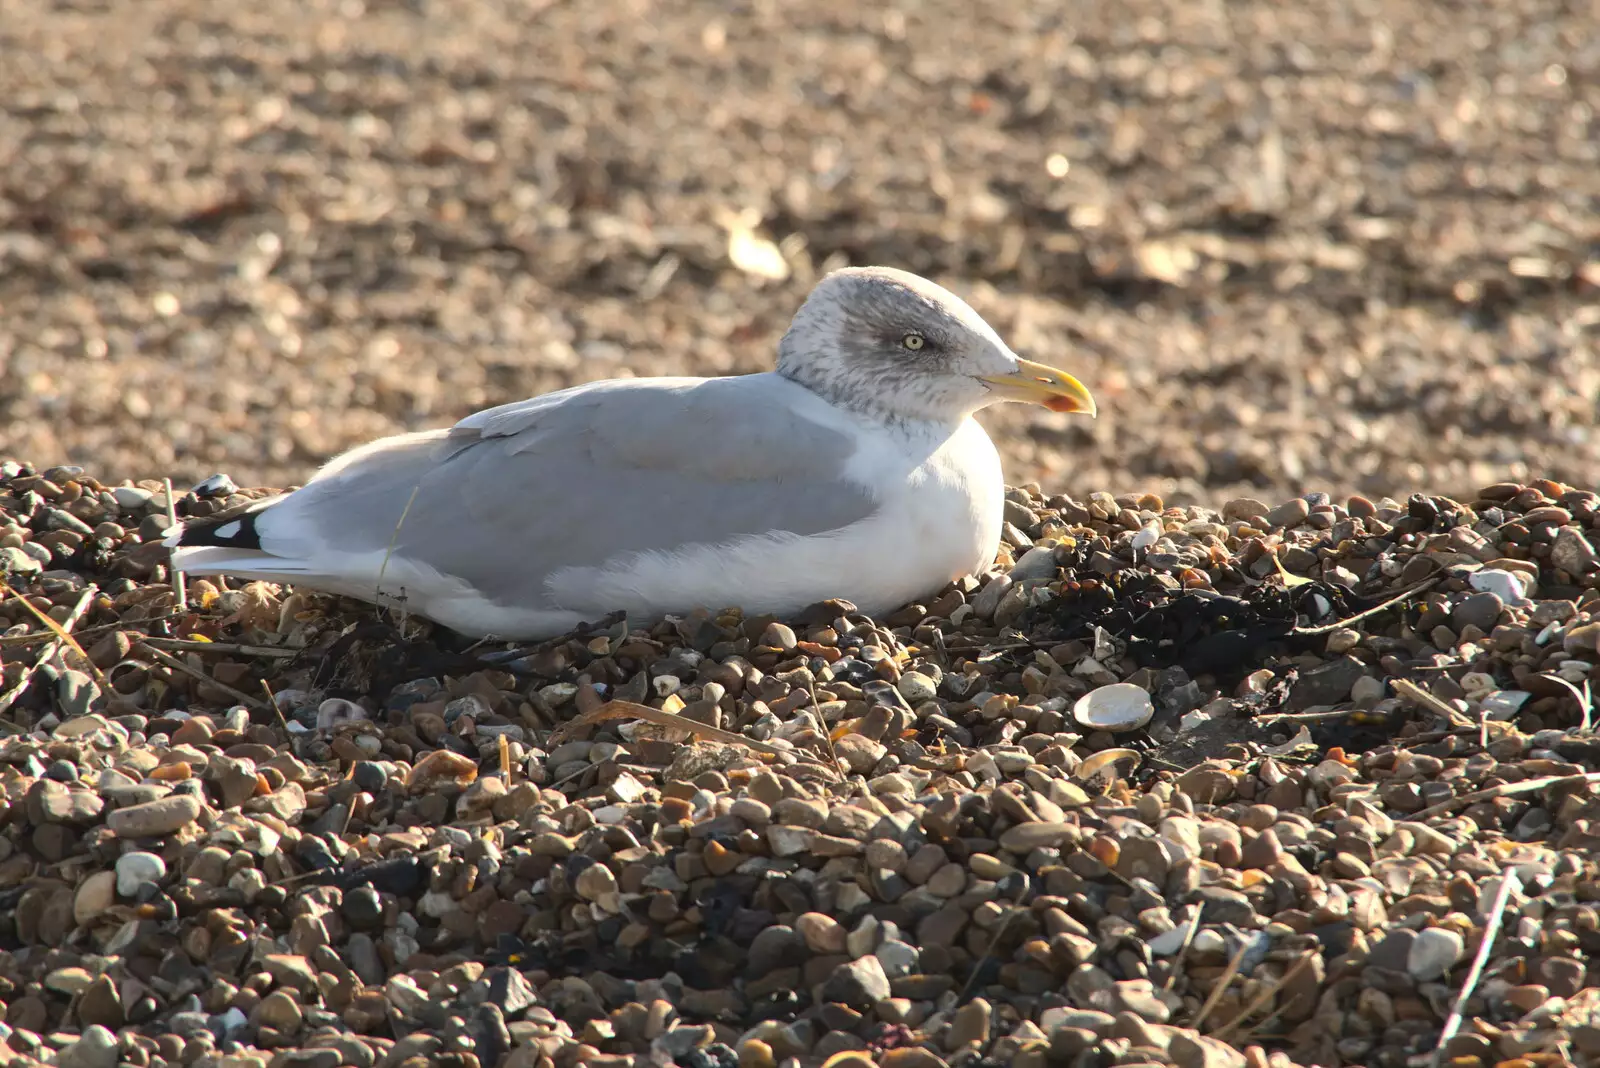 A juvenile gull sits on the beach, from A Postcard from Felixstowe, Suffolk - 5th October 2022